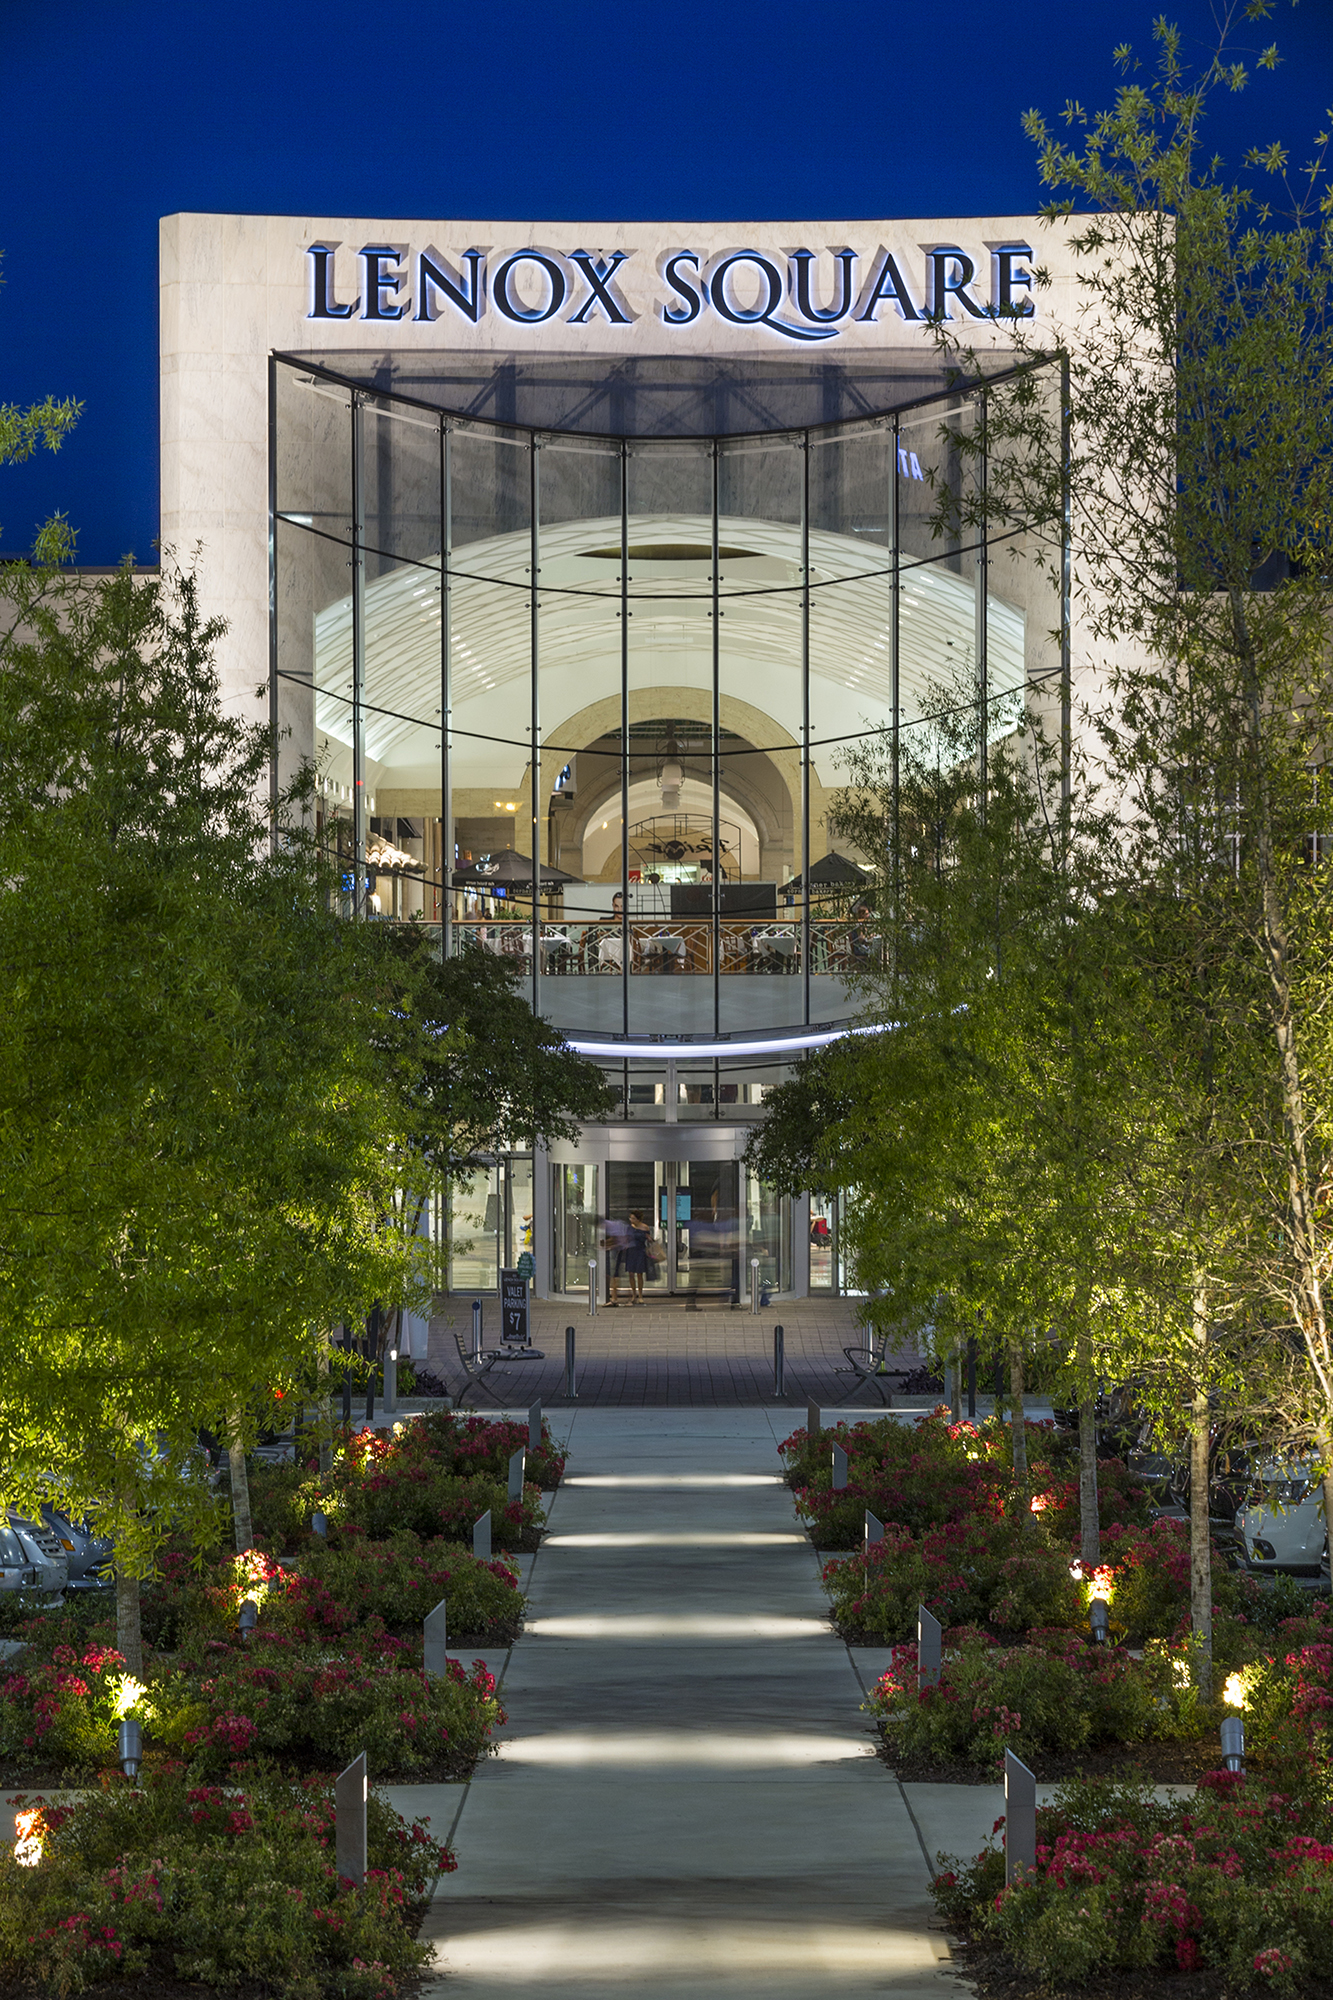 Atlanta capital of the U.S. state of Georgia, food court in Lenox Square a  shopping centre mall with well known brand name stores on Peachtree Road  Stock Photo - Alamy